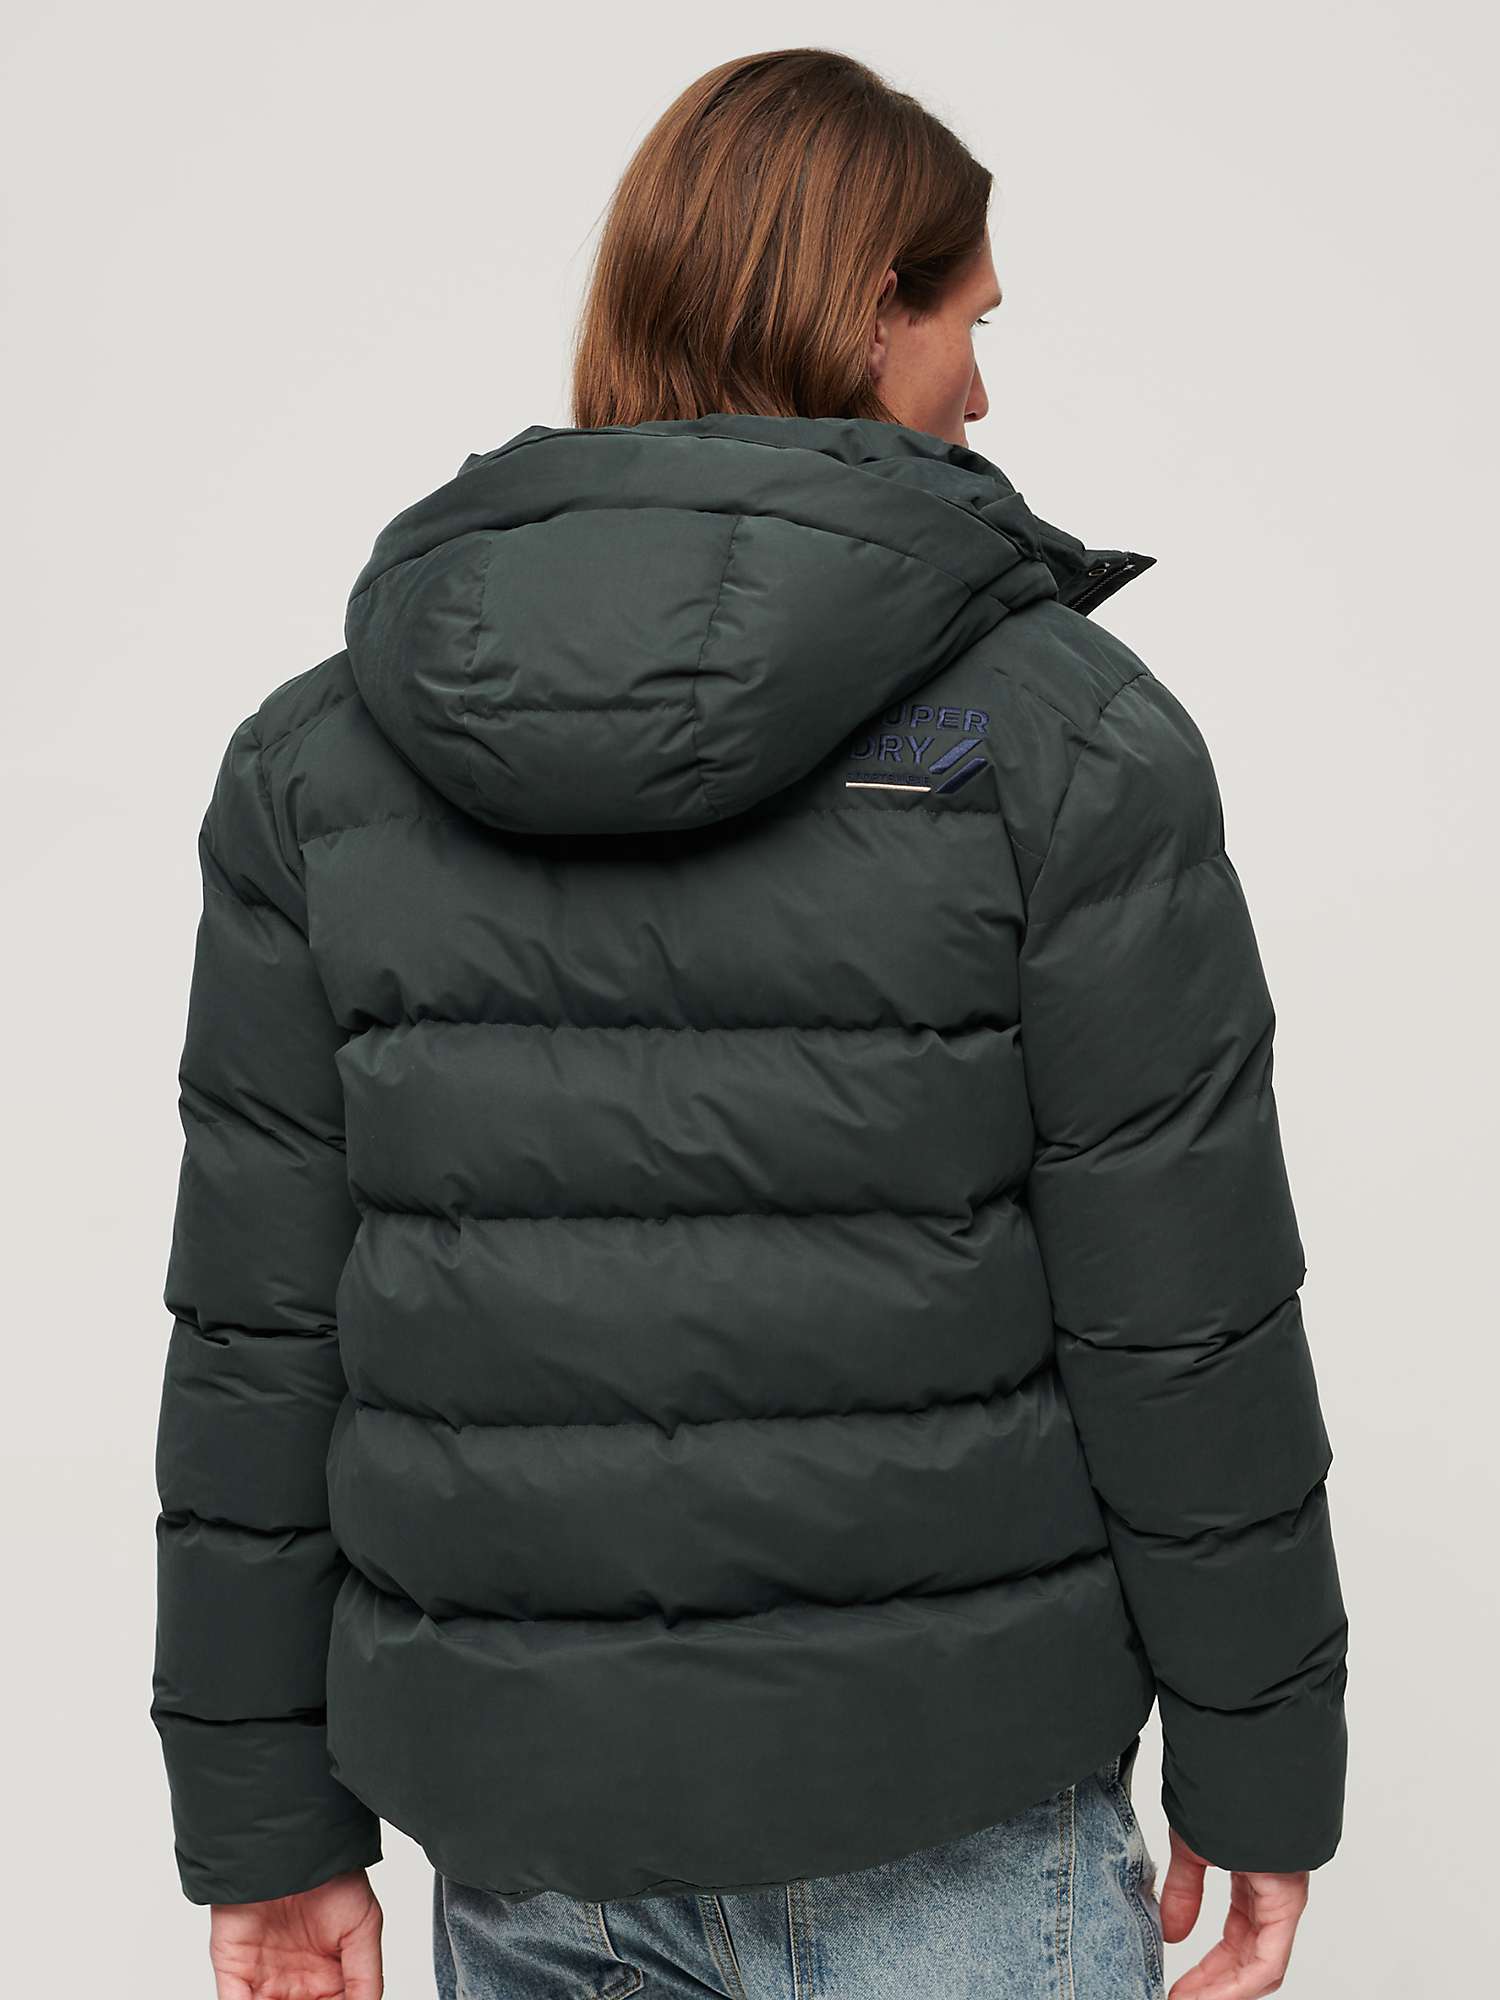 Buy Superdry Hooded Microfibre Sports Puffer Jacket Online at johnlewis.com